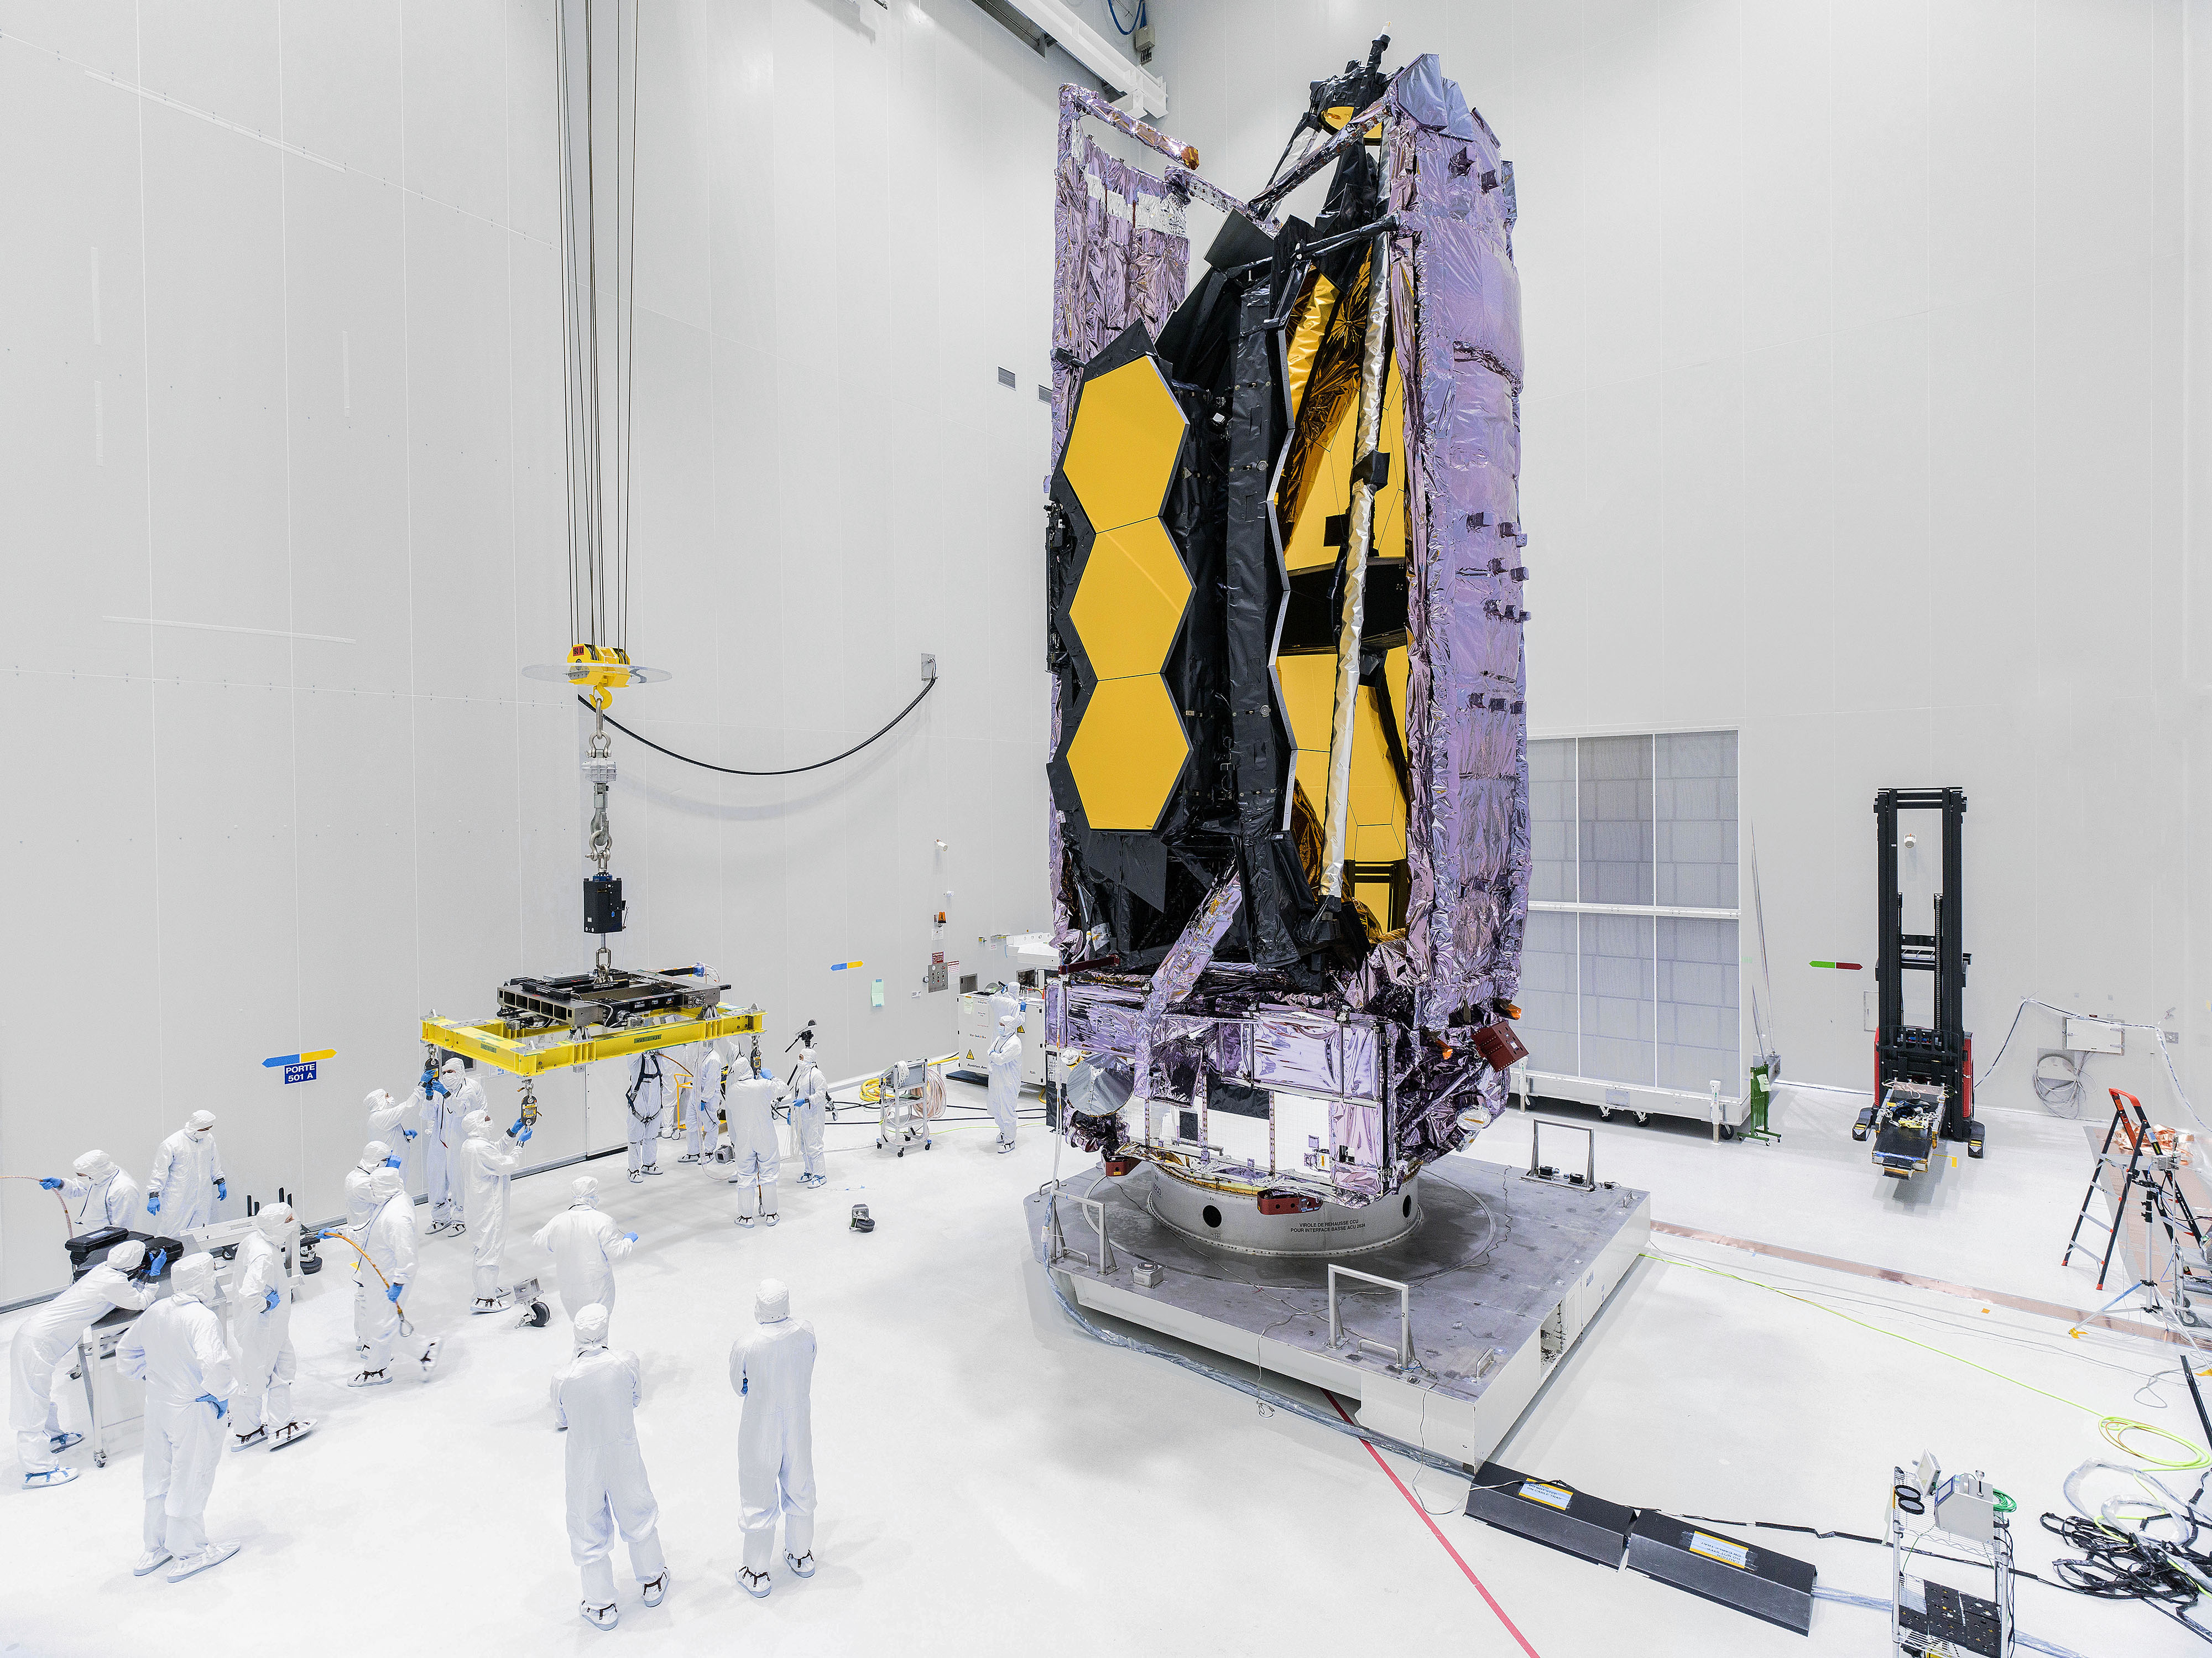 Image taken in a cleanroom at Europe’s Spaceport in Kourou, French Guiana. Dozens of cleanroom technicians, wearing white contamination-control suits and blue gloves, stand towards the left side of this image. On the right side is the Webb telescope in its folded configuration. Its purple sunshield pallets enclose its hexagonal, gold-colored mirror segments. Other hardware, wires, and equipment are located around the cleanroom, which features bright white walls.